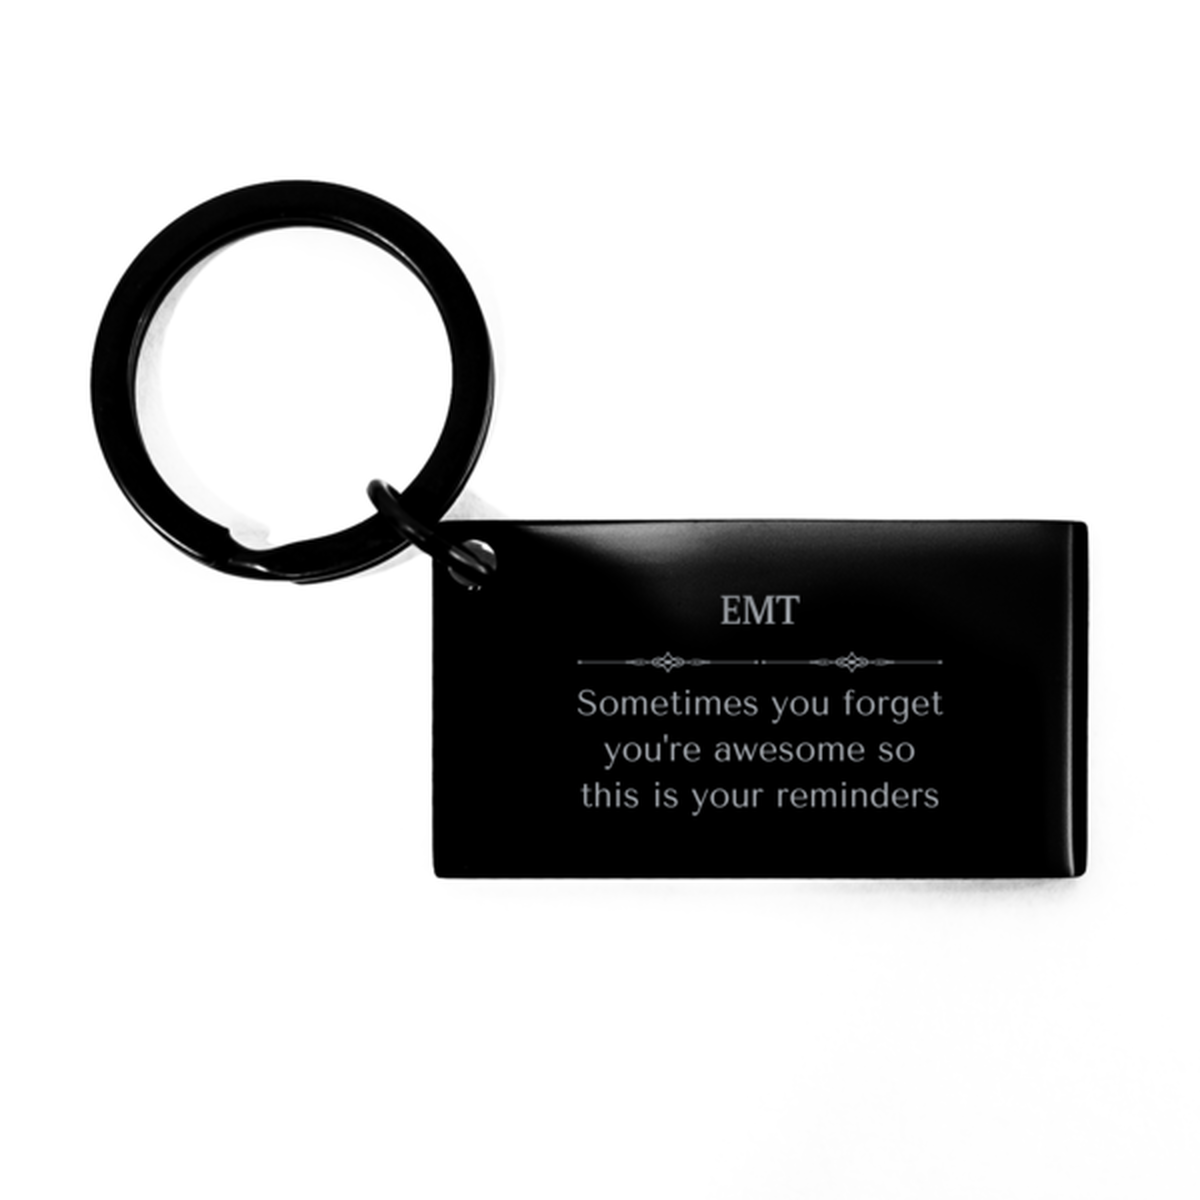 Sentimental EMT Keychain, Interior Designer Sometimes you forget you're awesome so this is your reminders, Graduation Christmas Birthday Gifts for EMT, Men, Women, Coworkers